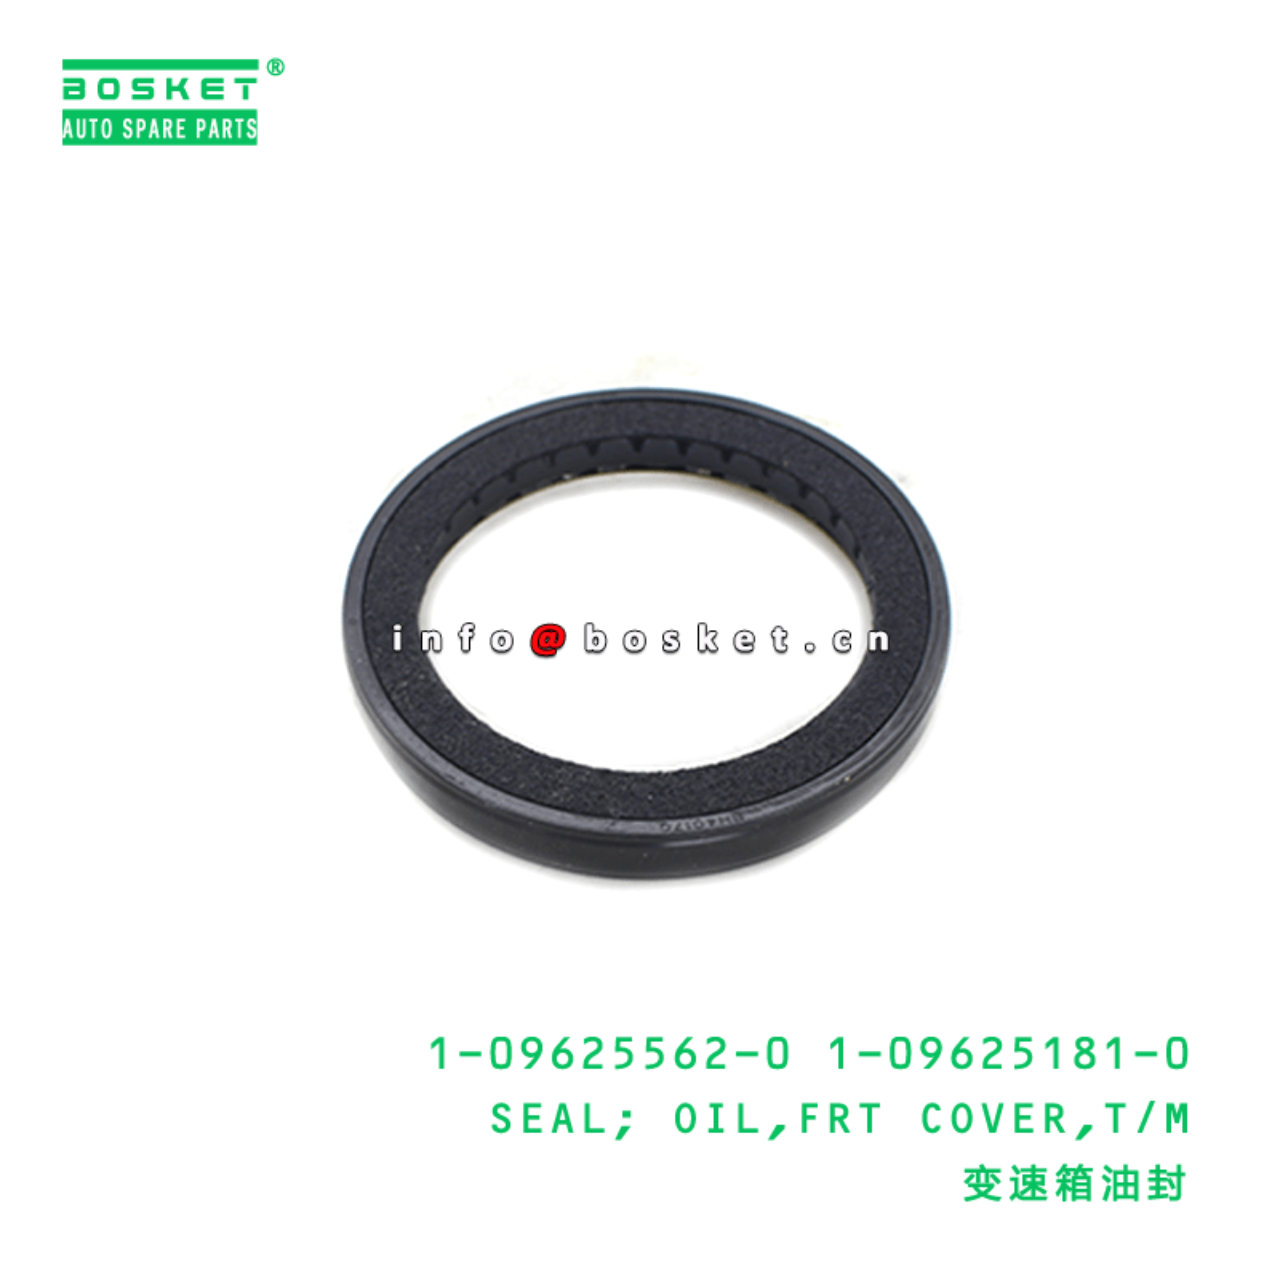 1-09625562-0 1-09625181-0 Transmission Front Cover Oil Seal 1096255620 1096251810 Suitable for ISUZU